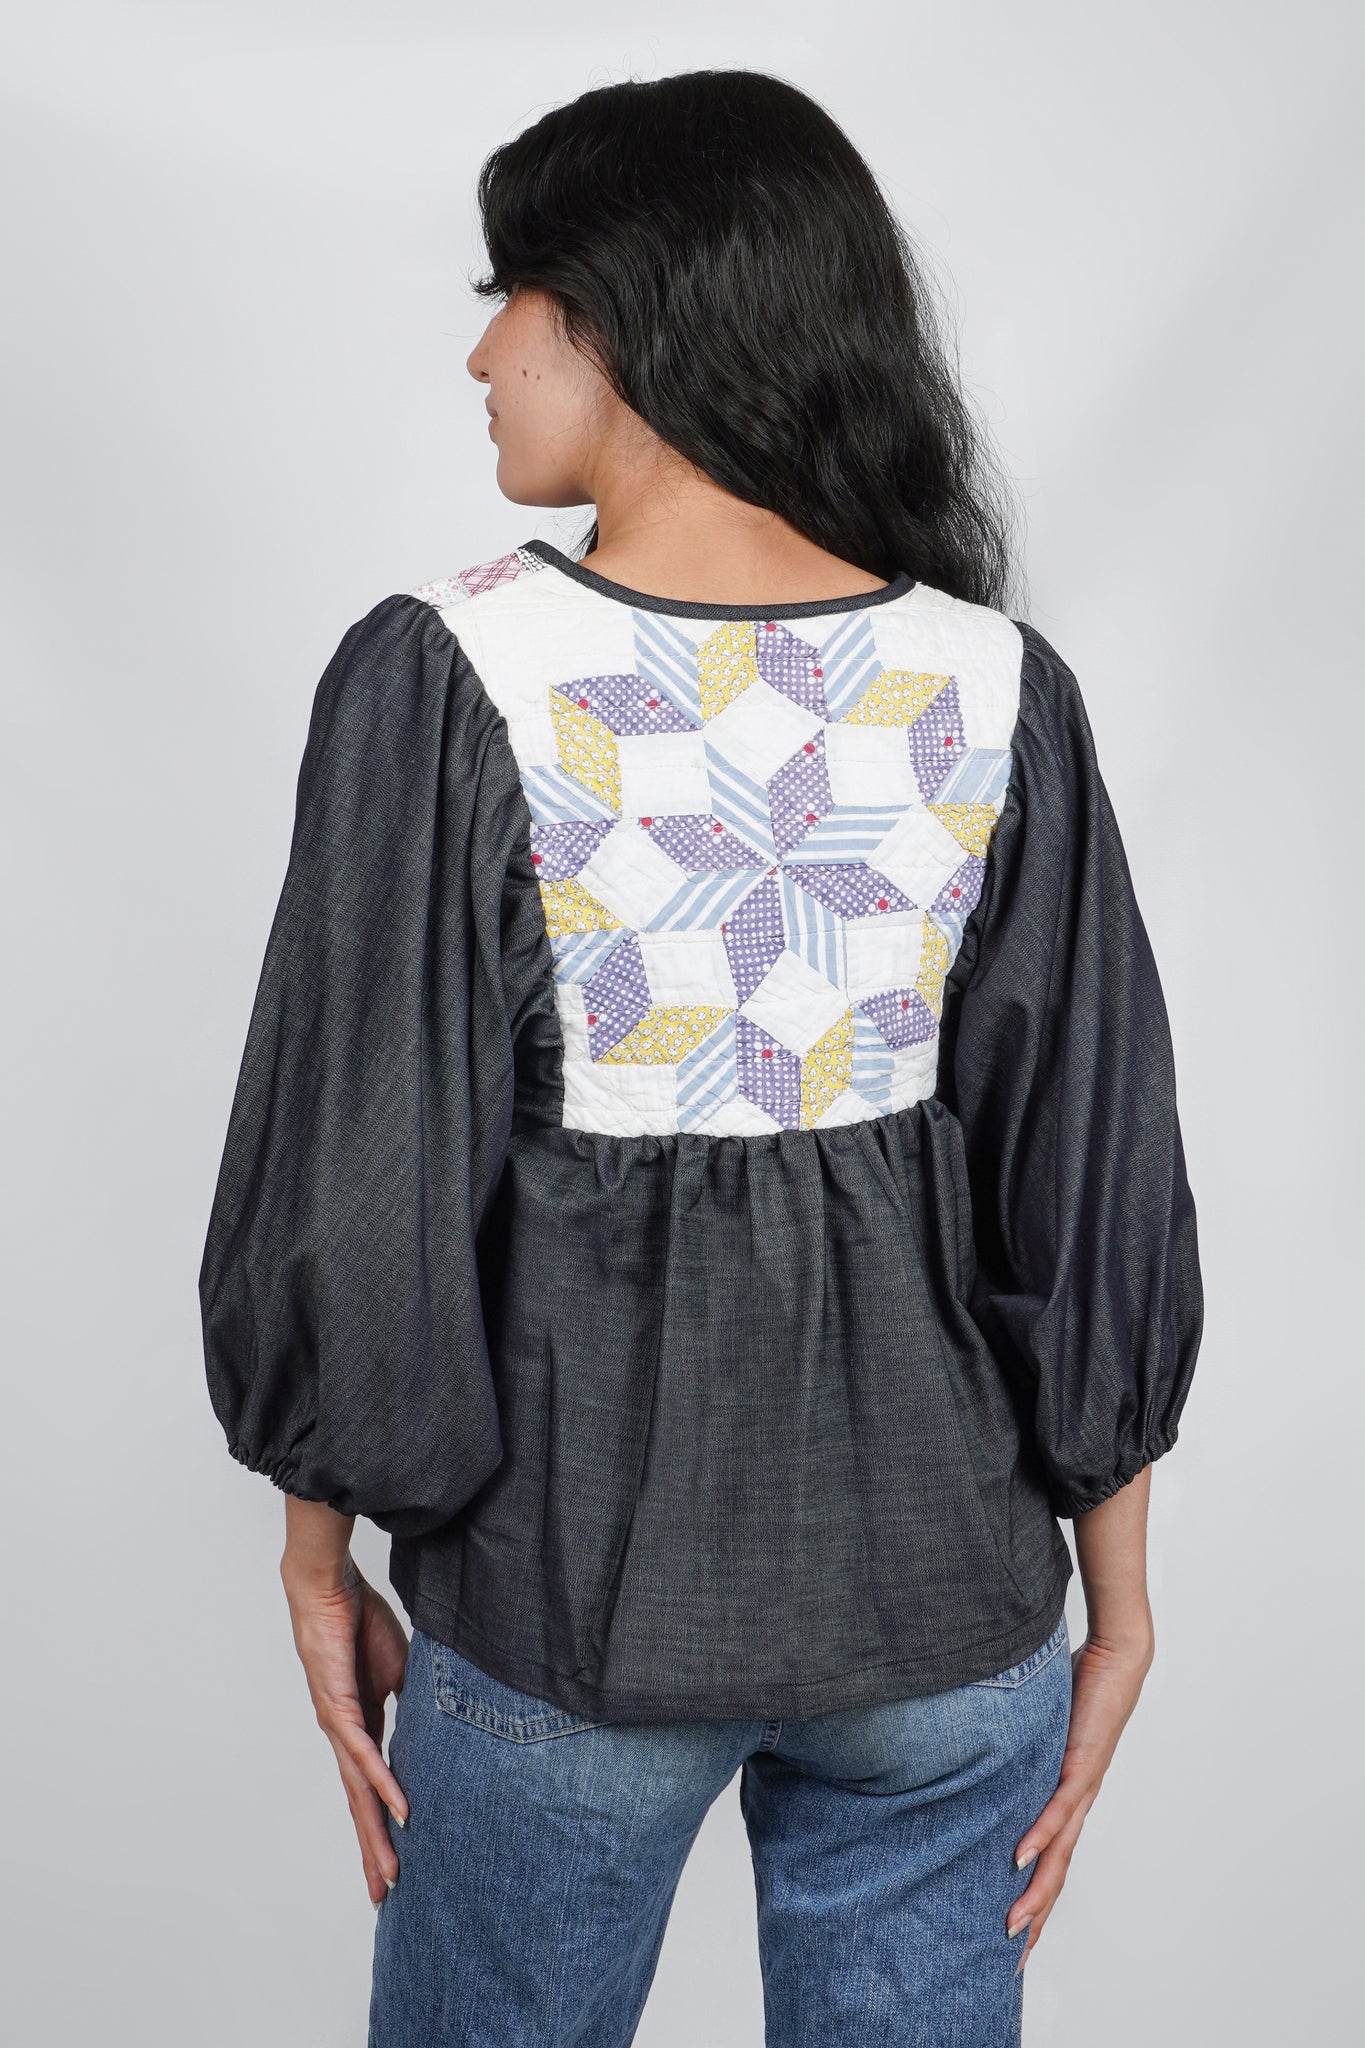 Remnant Blouse | Vintage Quilt and Deadstock Denim | Small